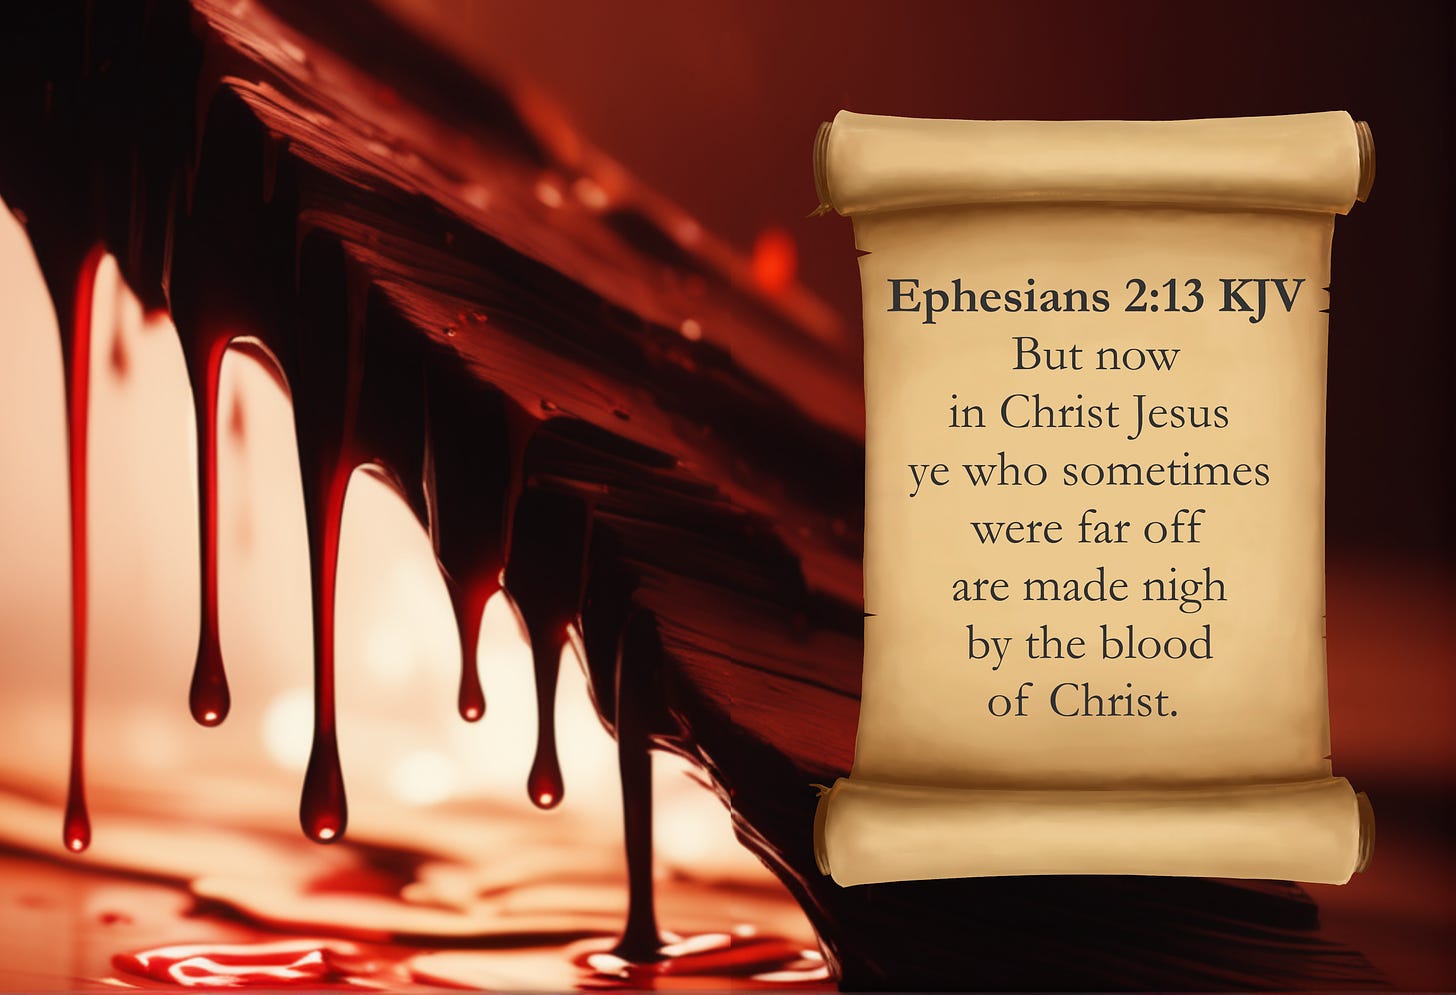 Dripping Blood of Jesus Christ KJV Card -  Ephesians 2:13 KJV - But now in Christ Jesus ye who sometimes were far off are made nigh by the blood of Christ. 